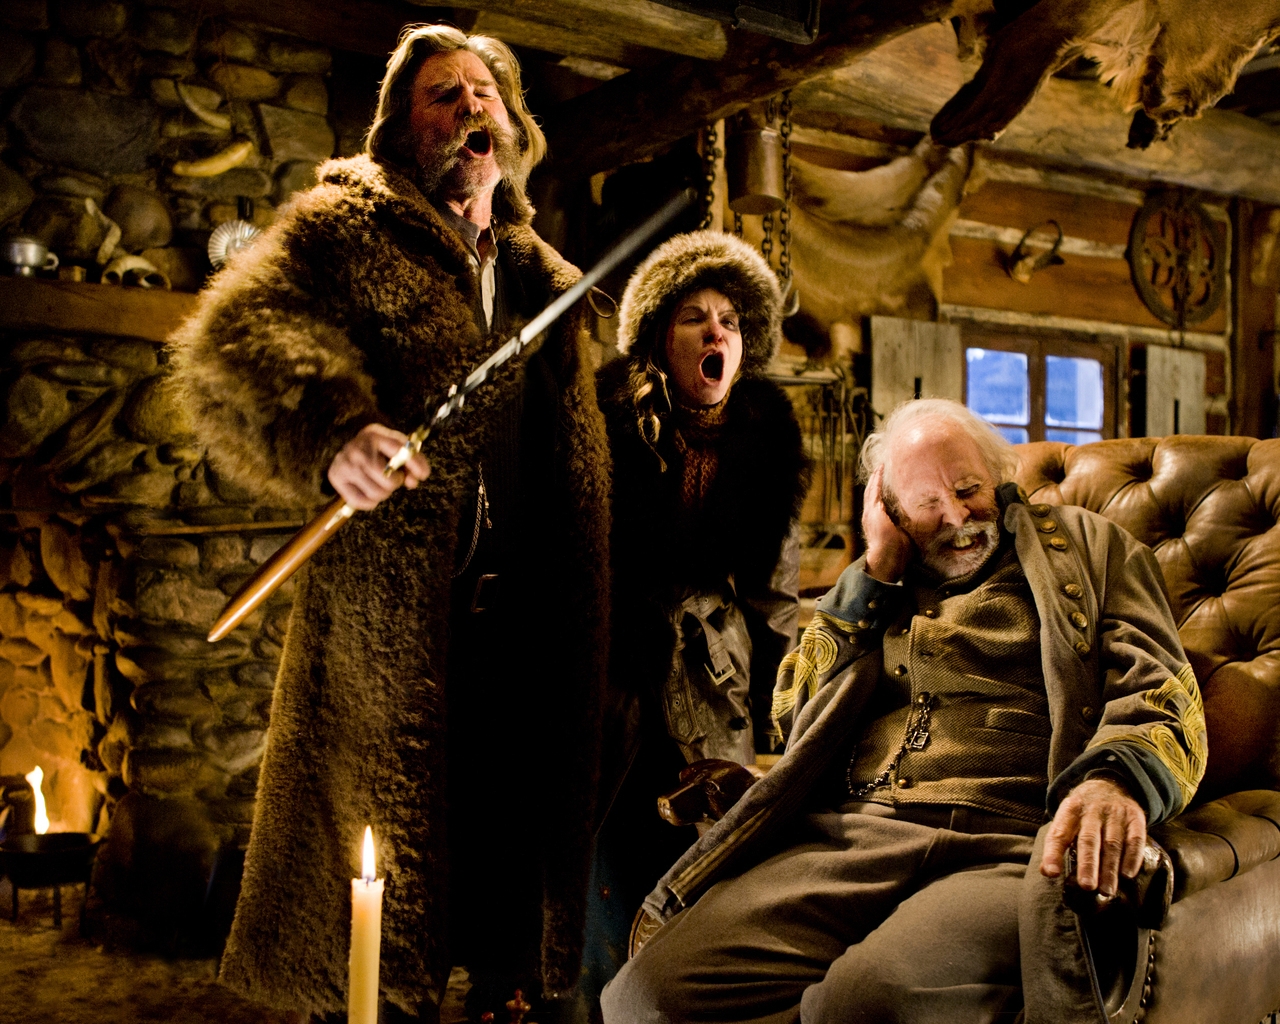 The Hateful Eight Movie Scene for 1280 x 1024 resolution